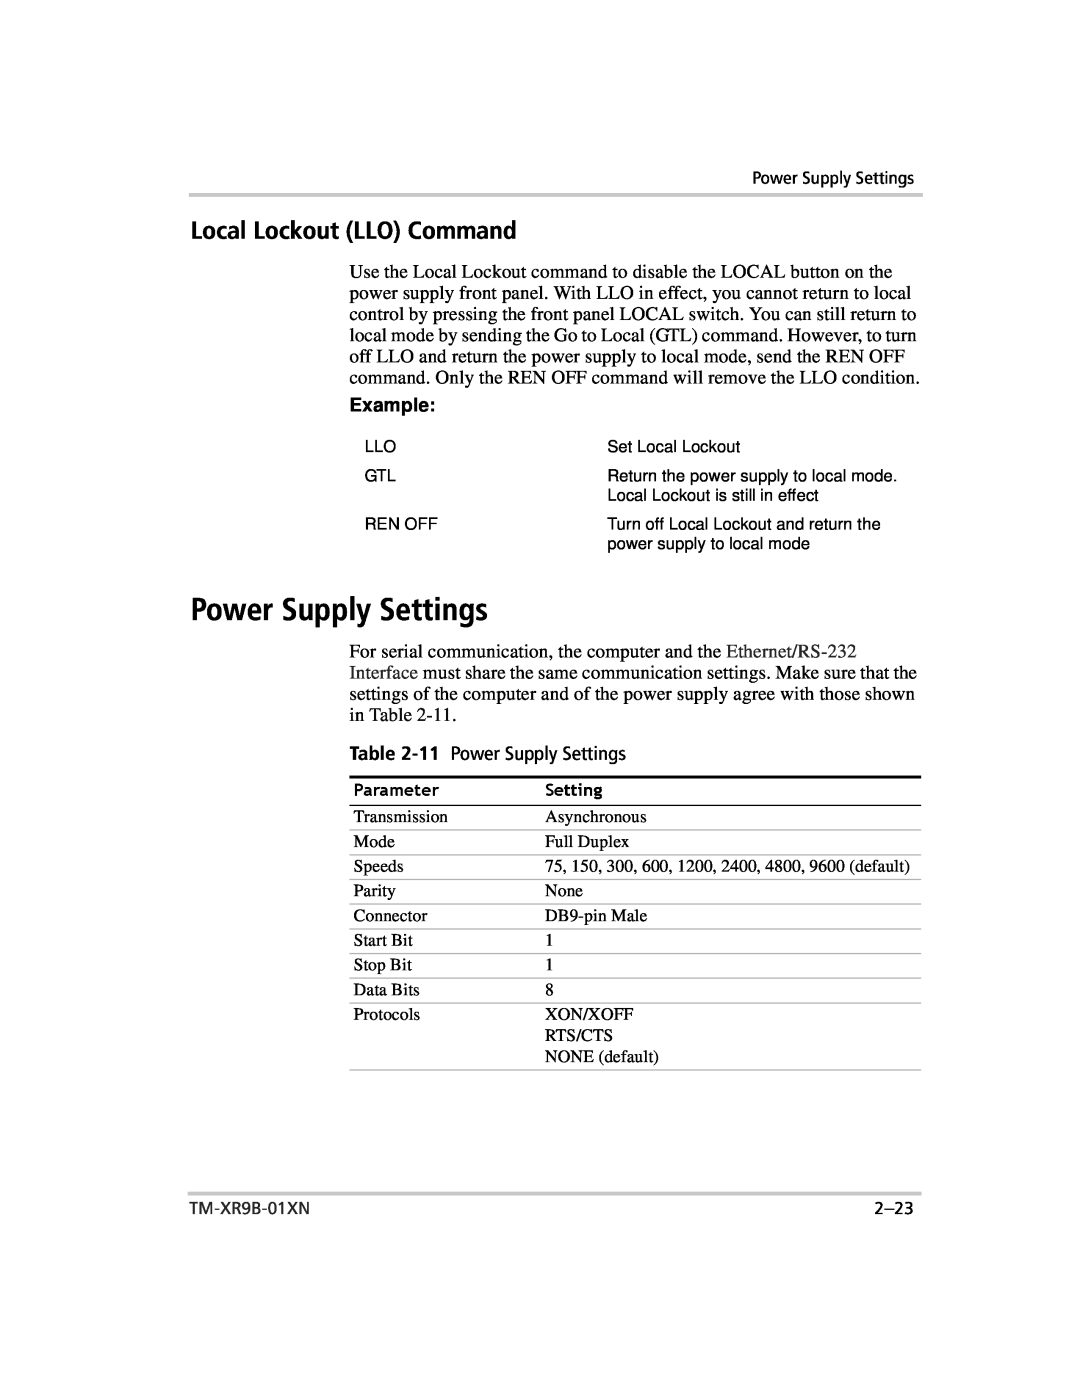 Xantrex Technology ENET-XFR3 manual Power Supply Settings, Local Lockout LLO Command, Example 